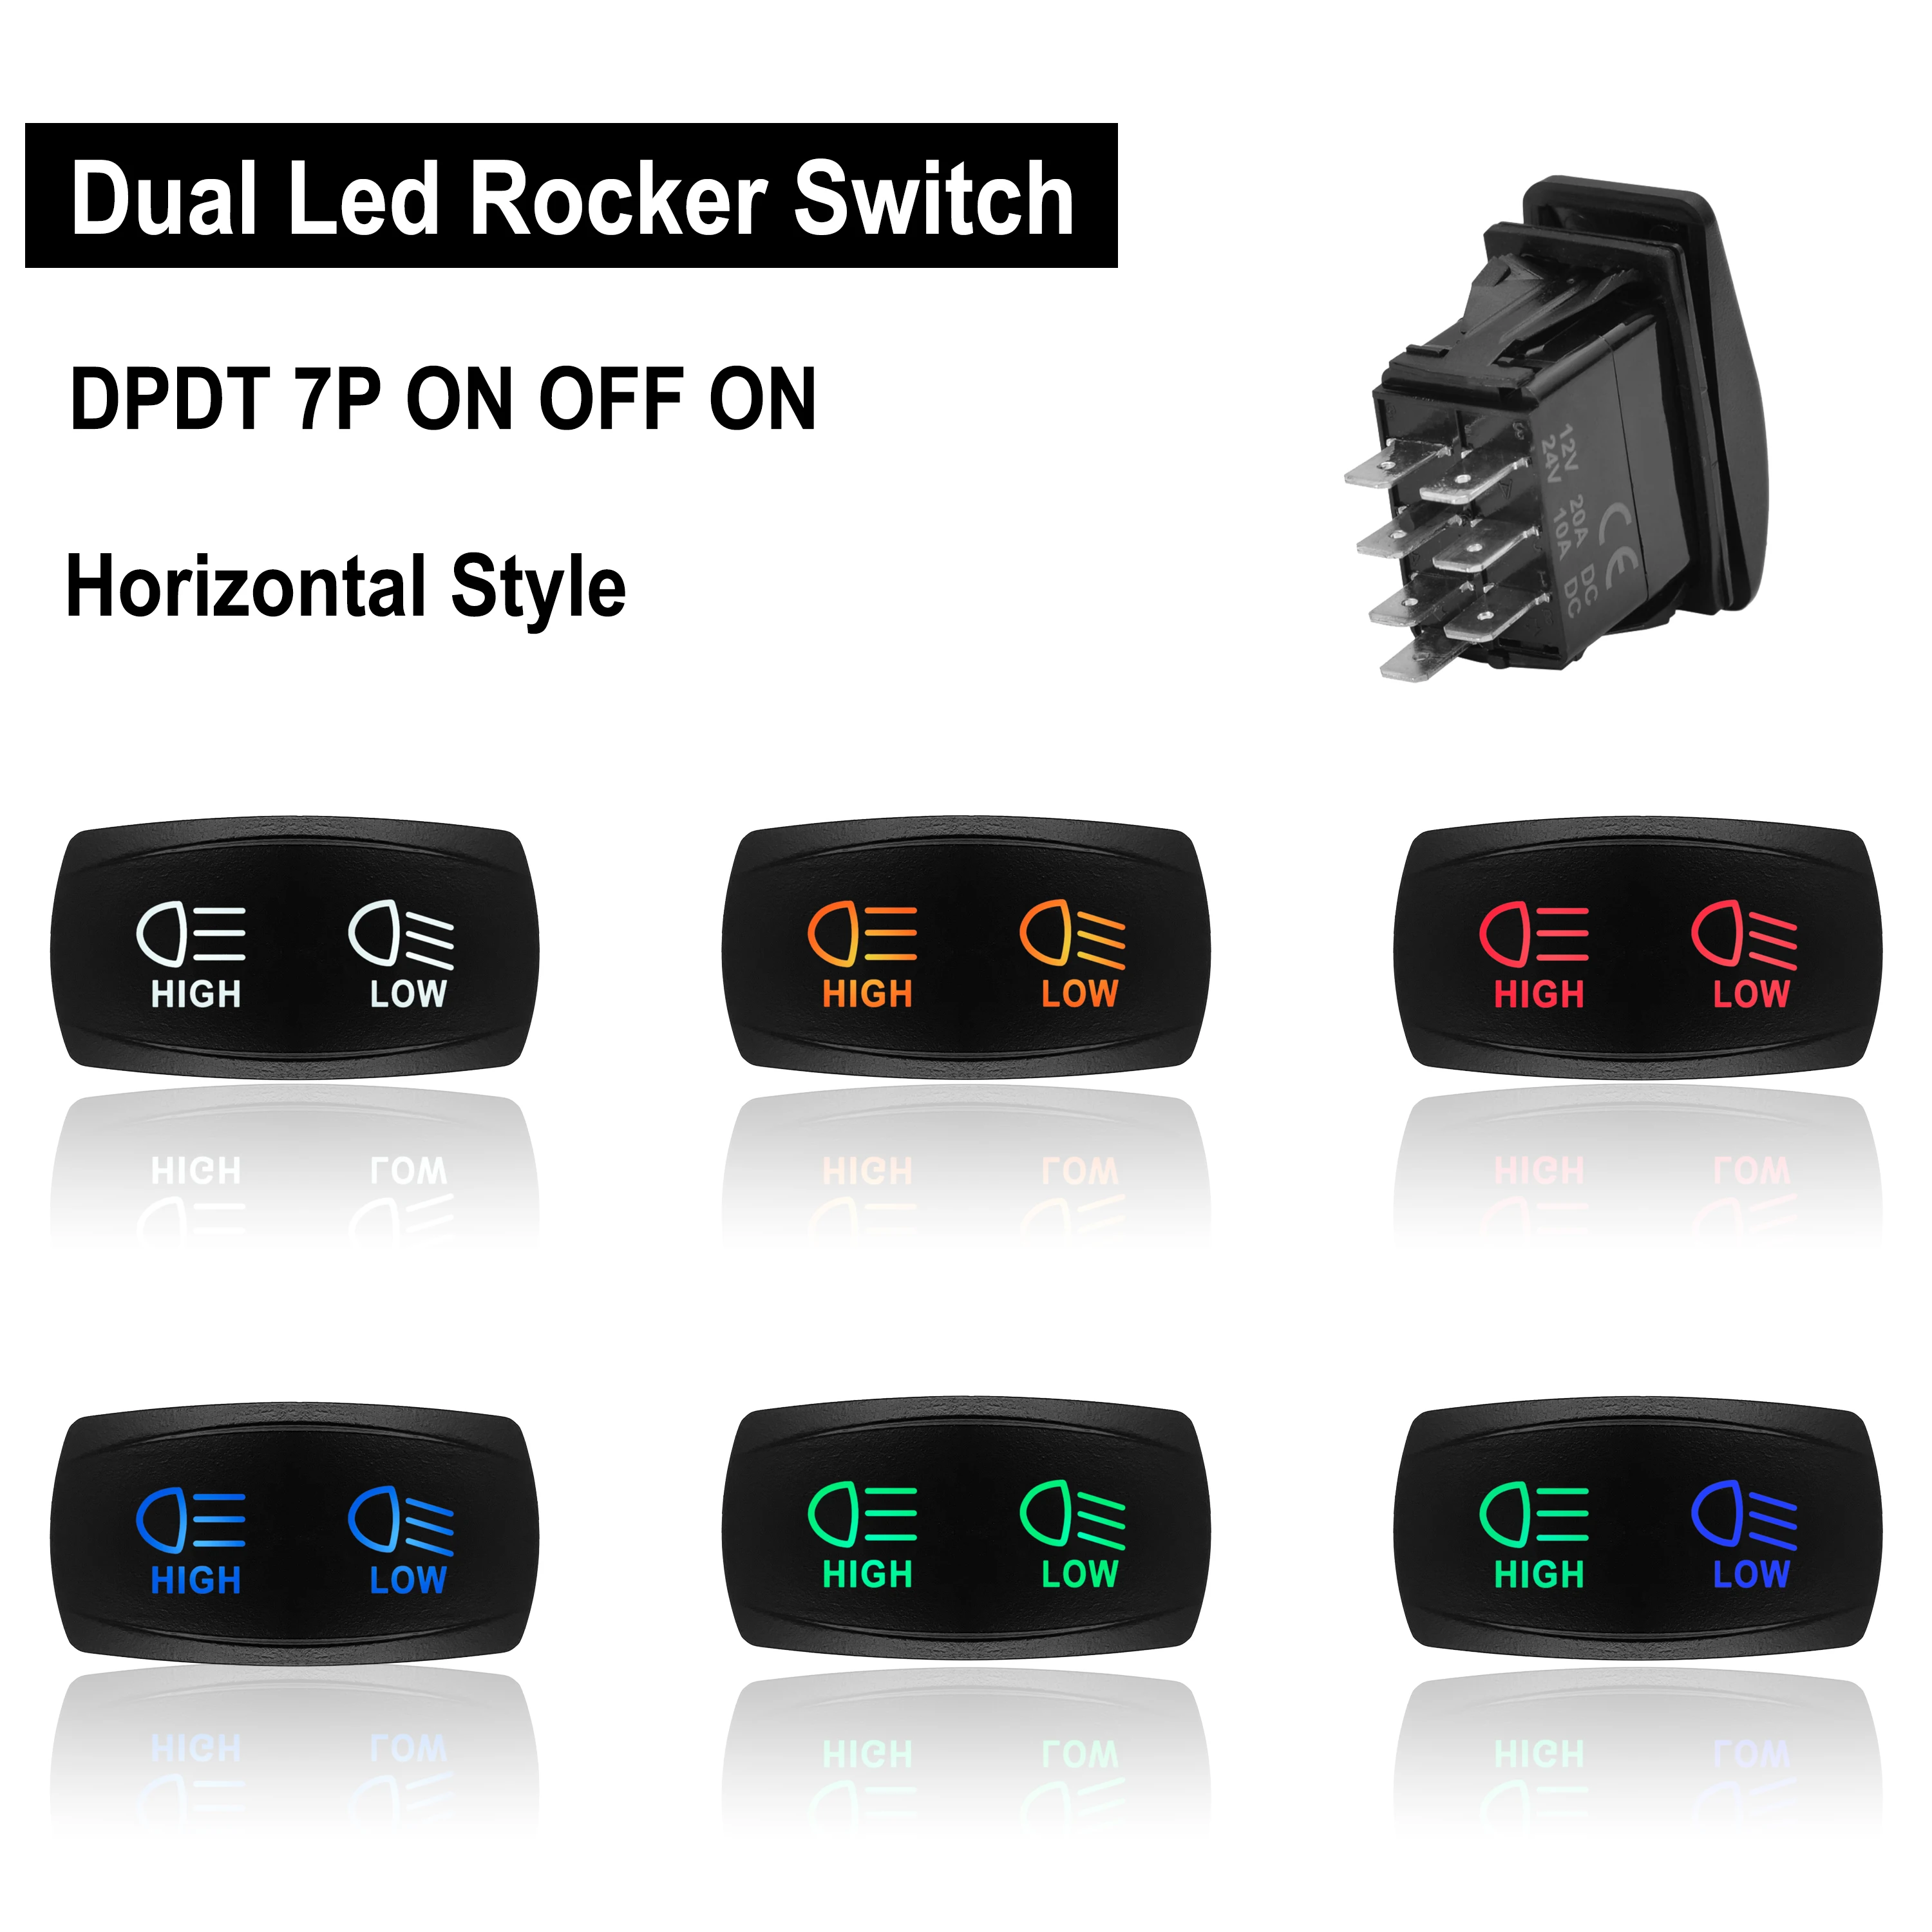 

DPDT 7P ON OFF ON Waterproof Horizontal High Low Dual Led Rocker Toggle Switch For Car Boat RV Marine ATV RZR RV Auto Truck